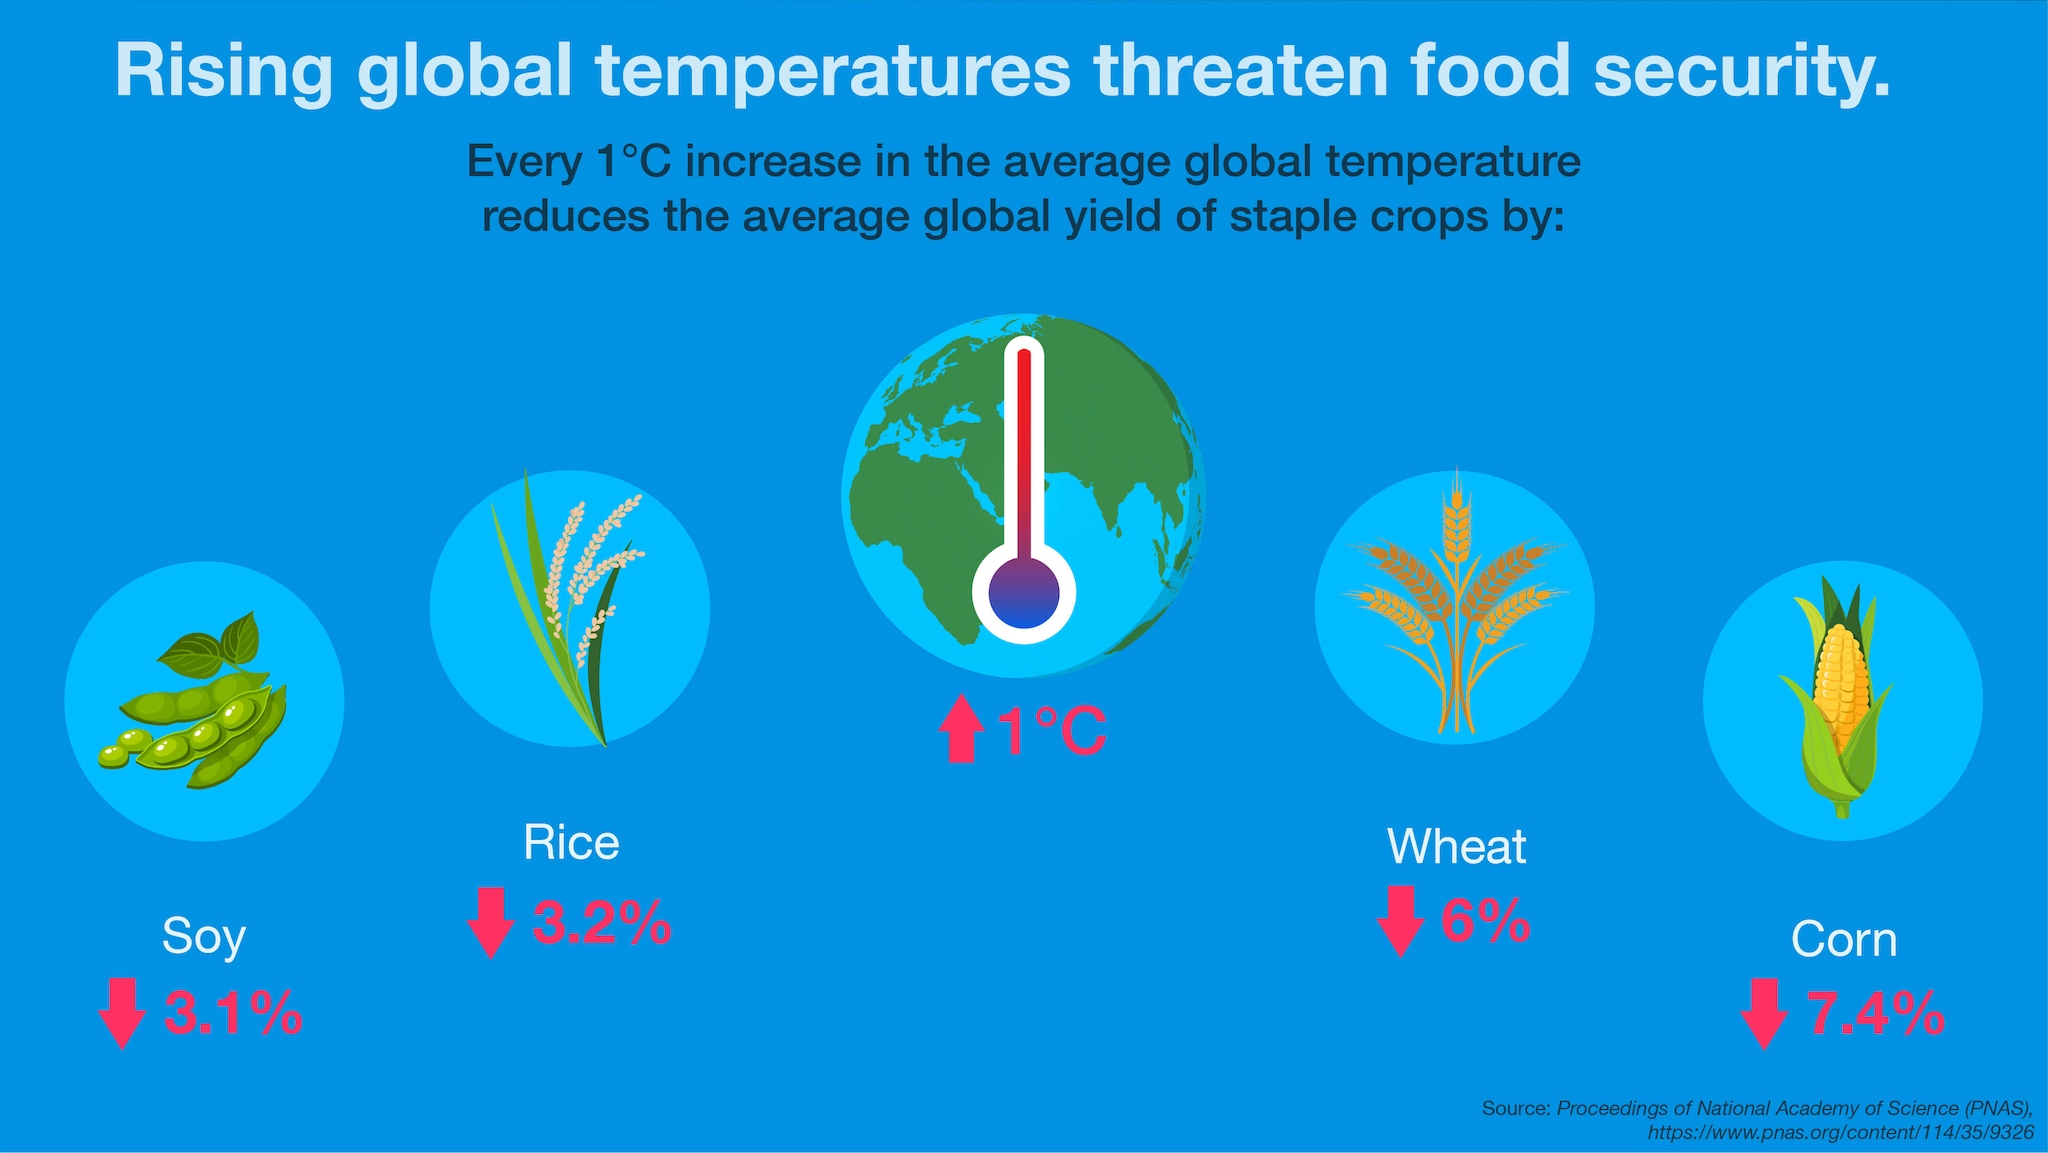 Illustration showing the rise in global temperatures threatening food security.